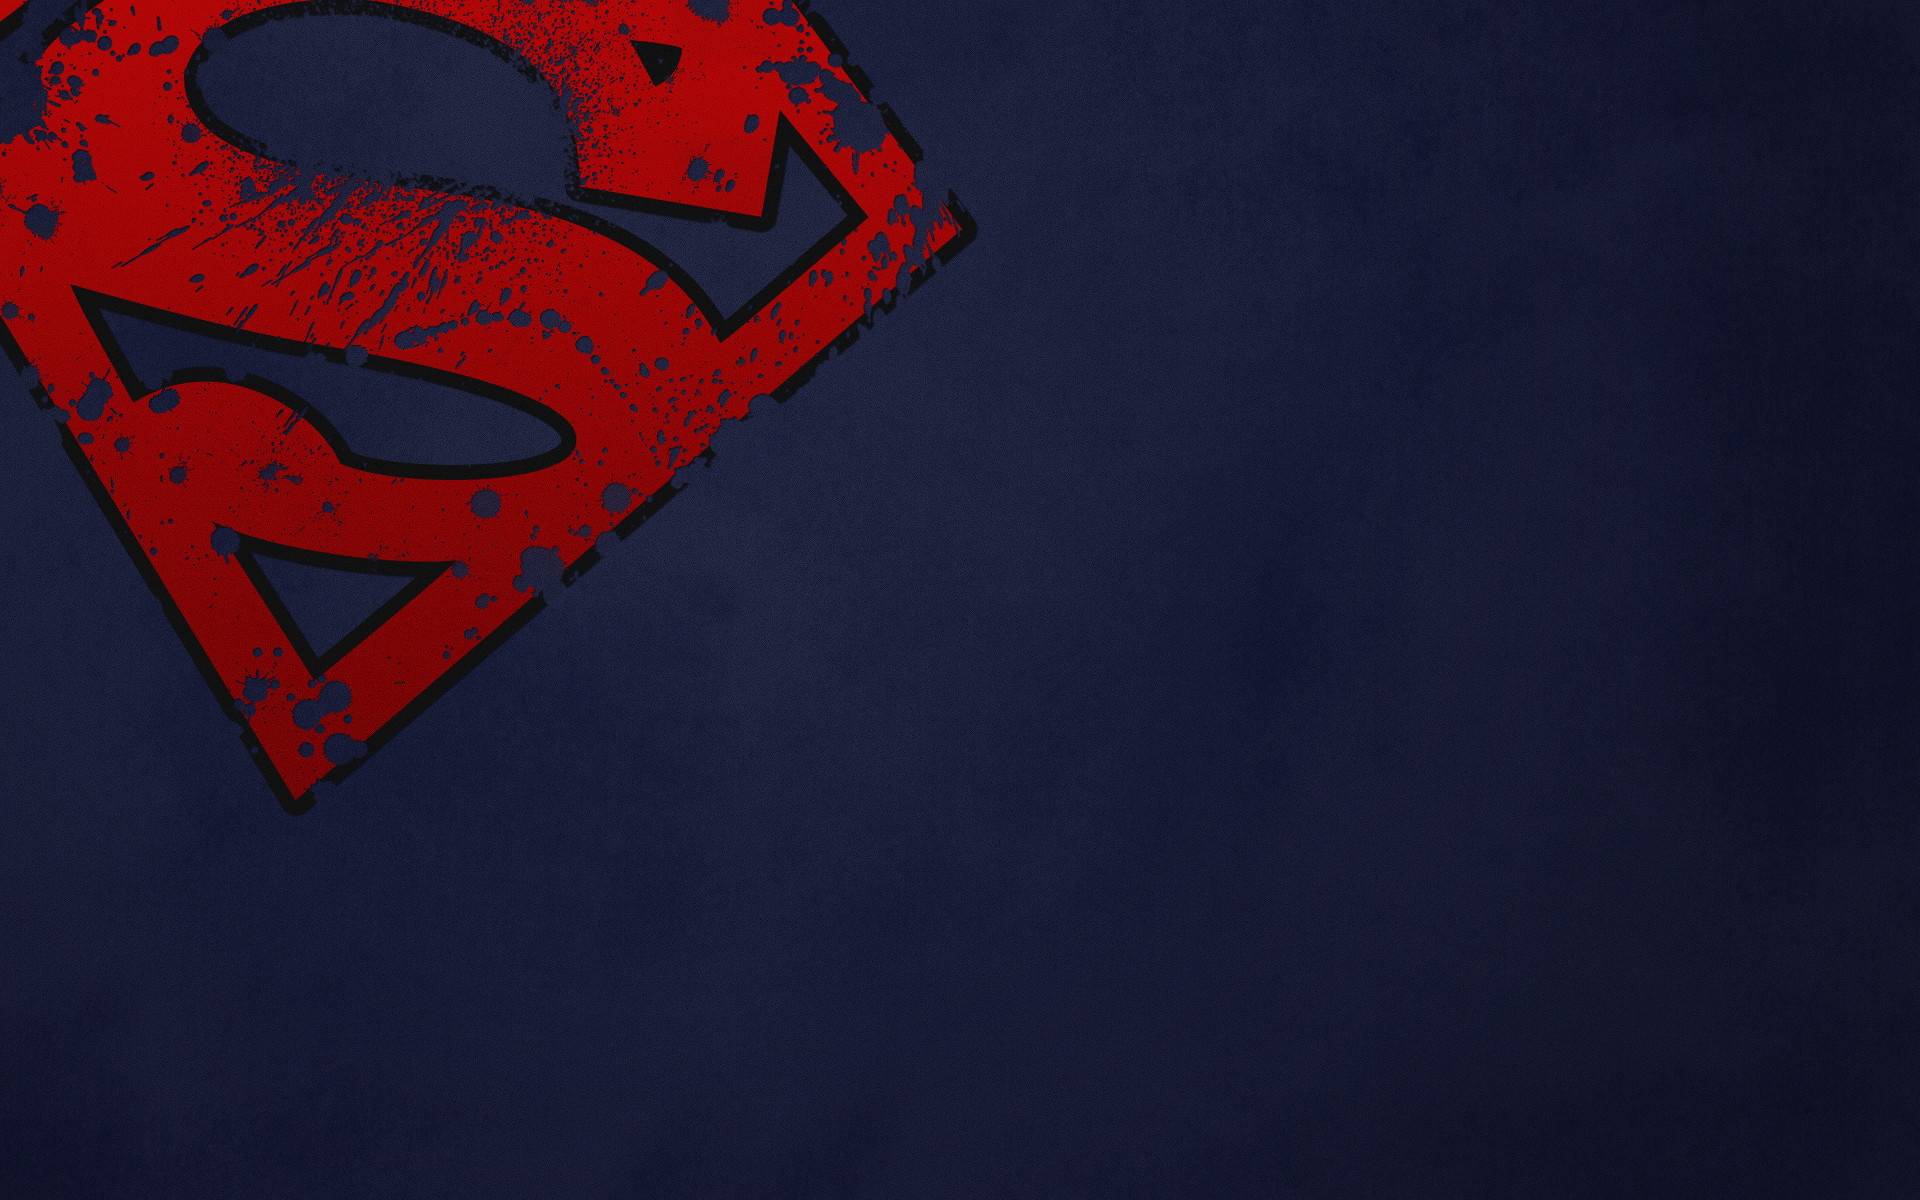 1920x1200 ... backgrounds for superman logo wallpaper background www ...